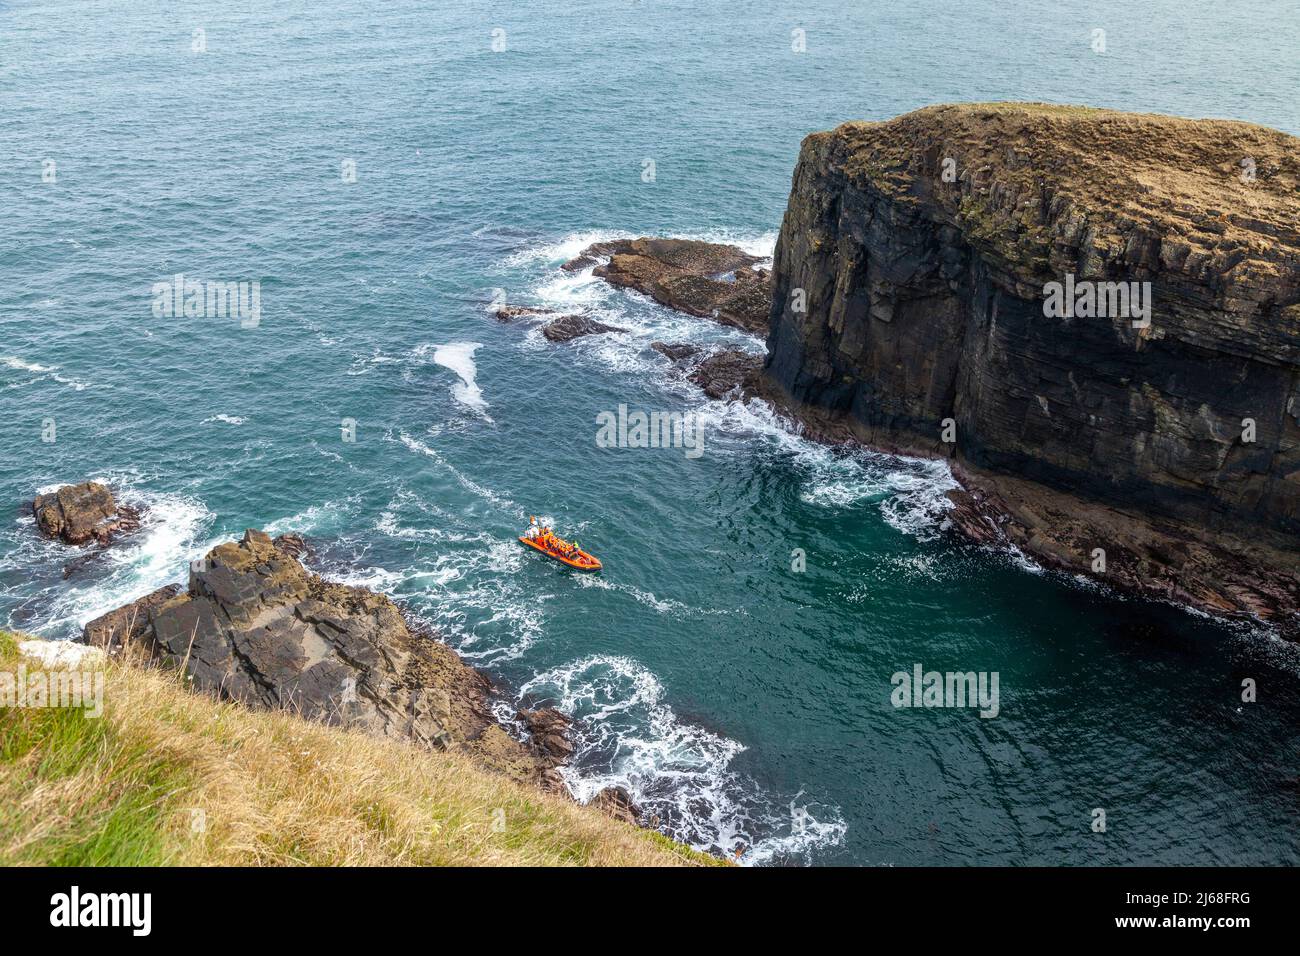 Whaligoe harbour with a rigid inflatable tourist boat viewing the cliffs Stock Photo